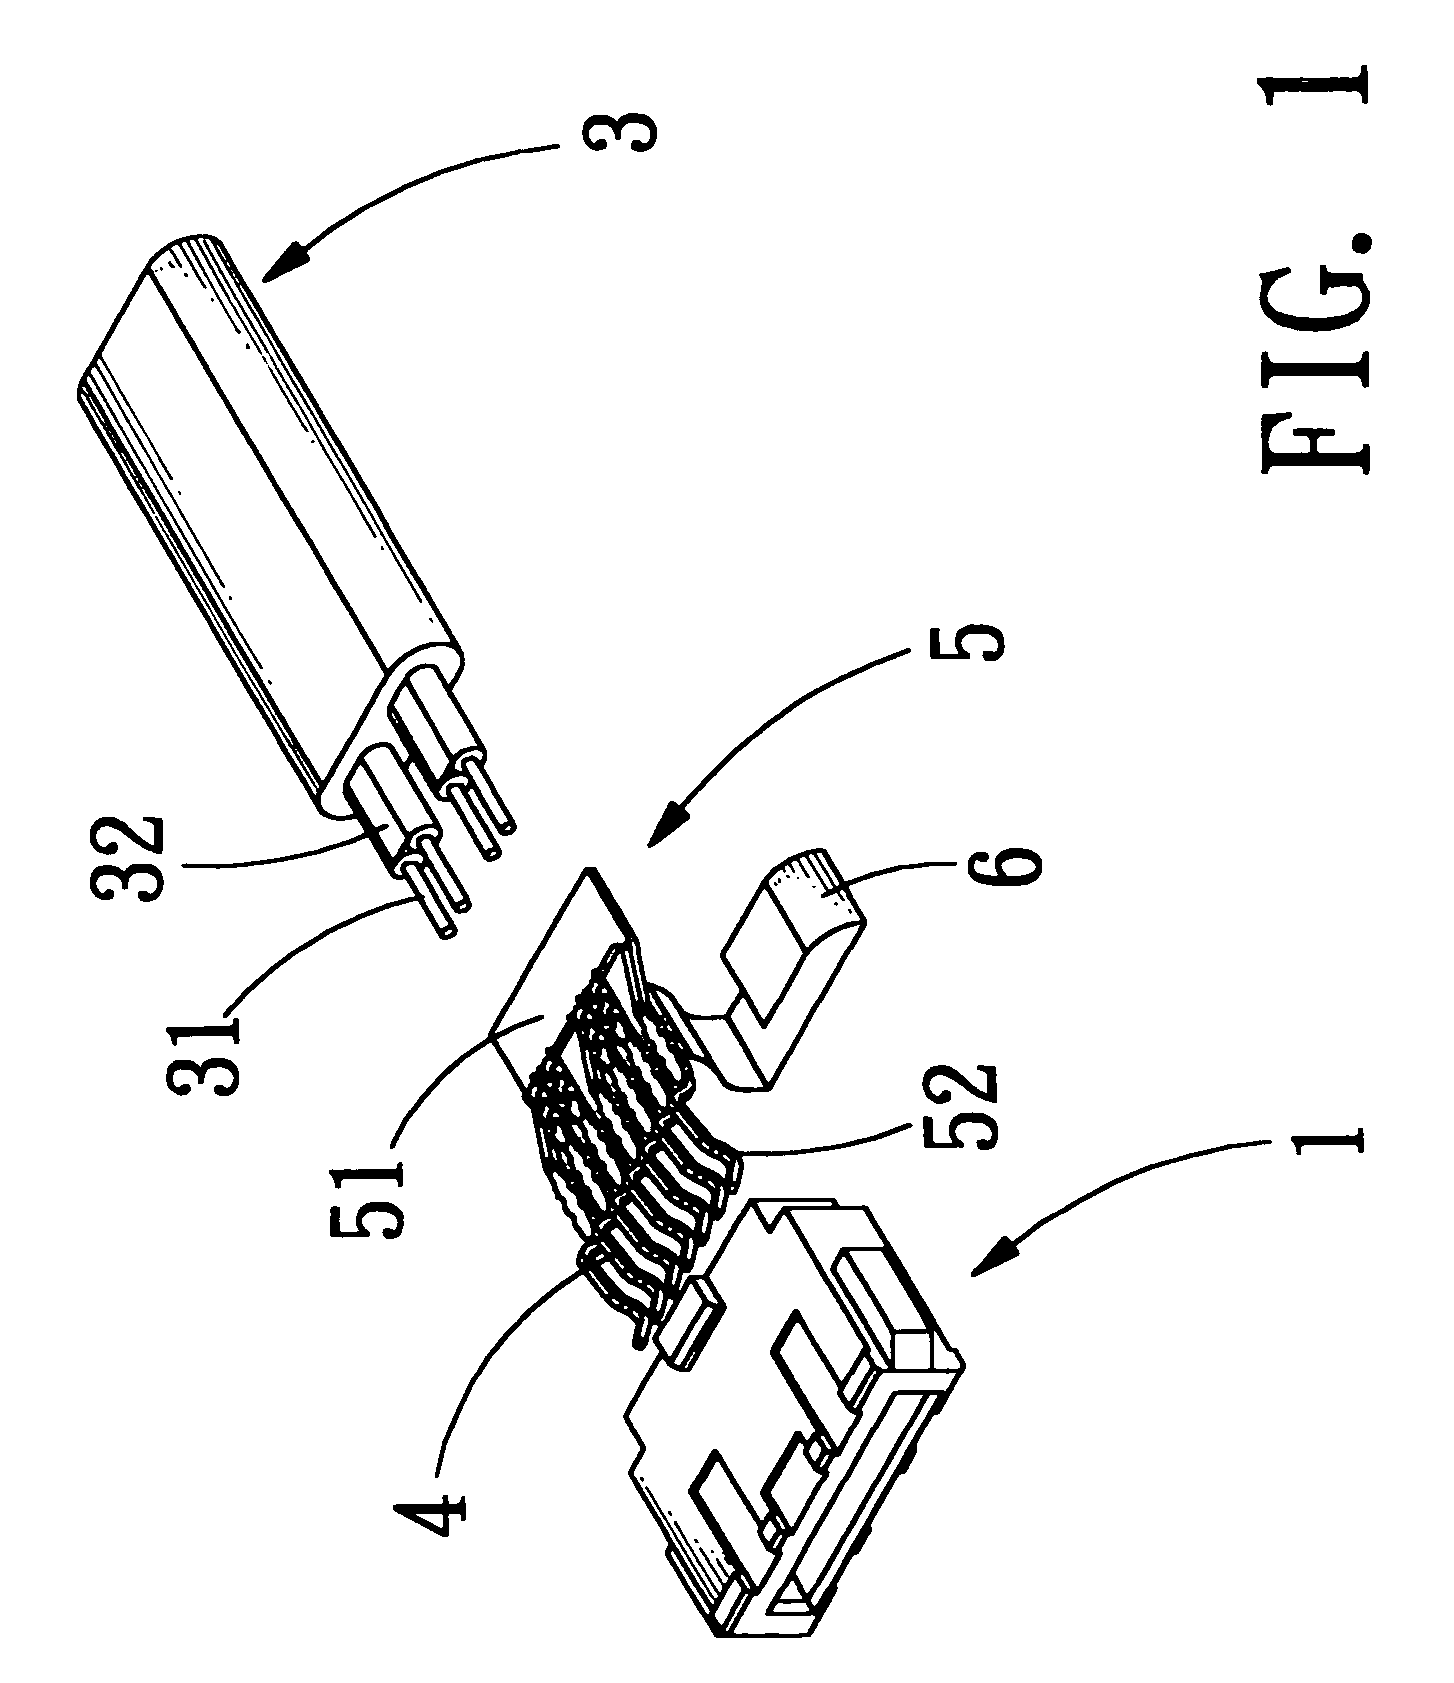 Electrical connector with grounding effect